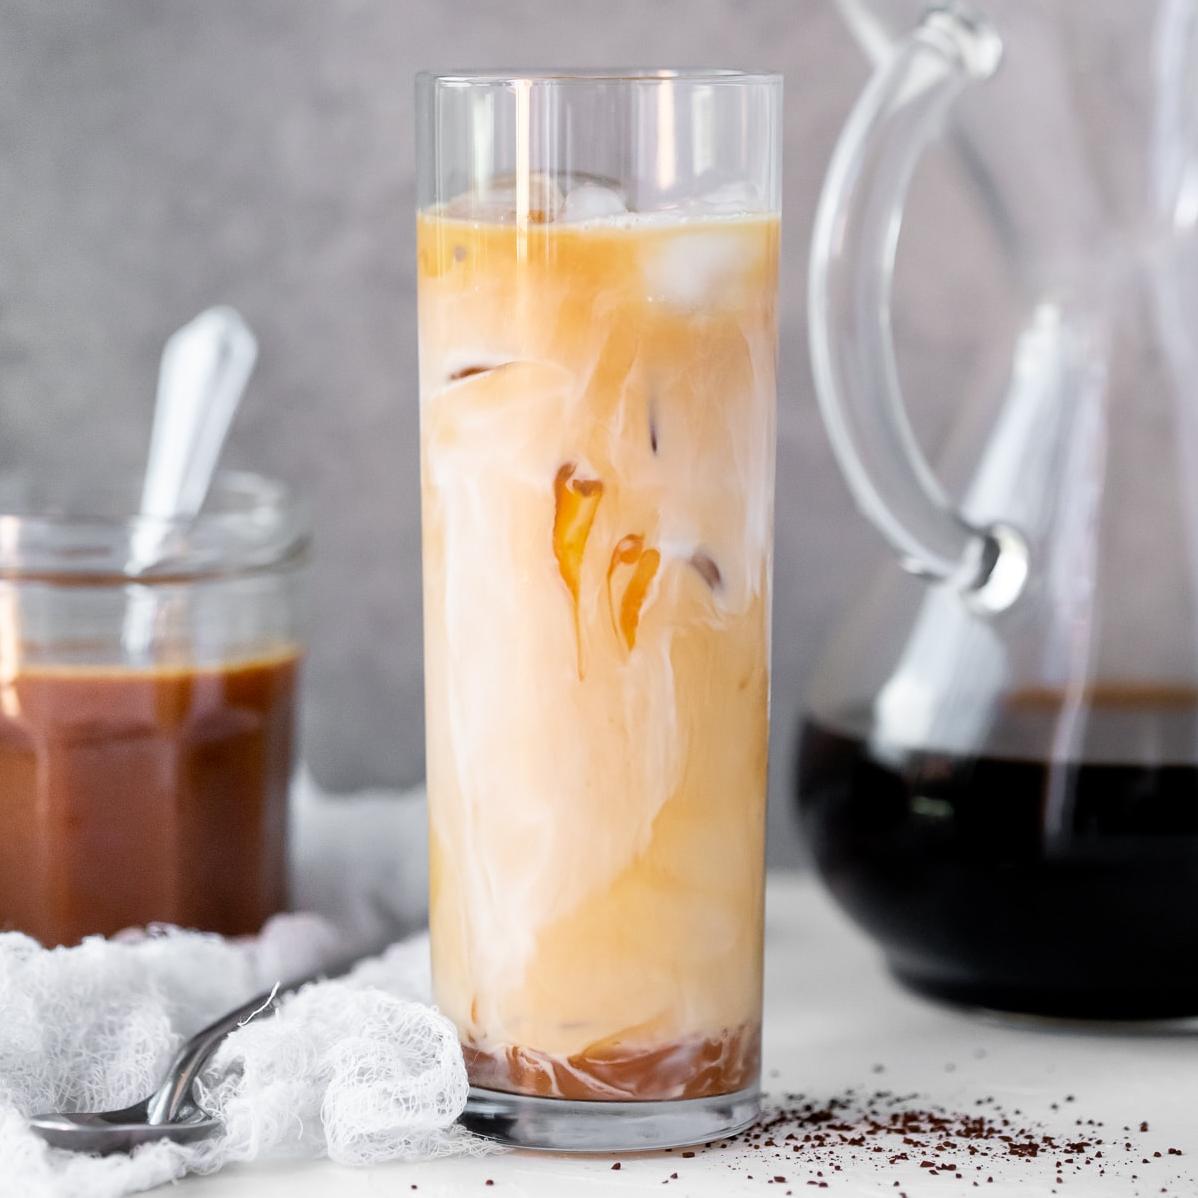  If you're a fan of coffee and caramel, this drink is pure perfection.